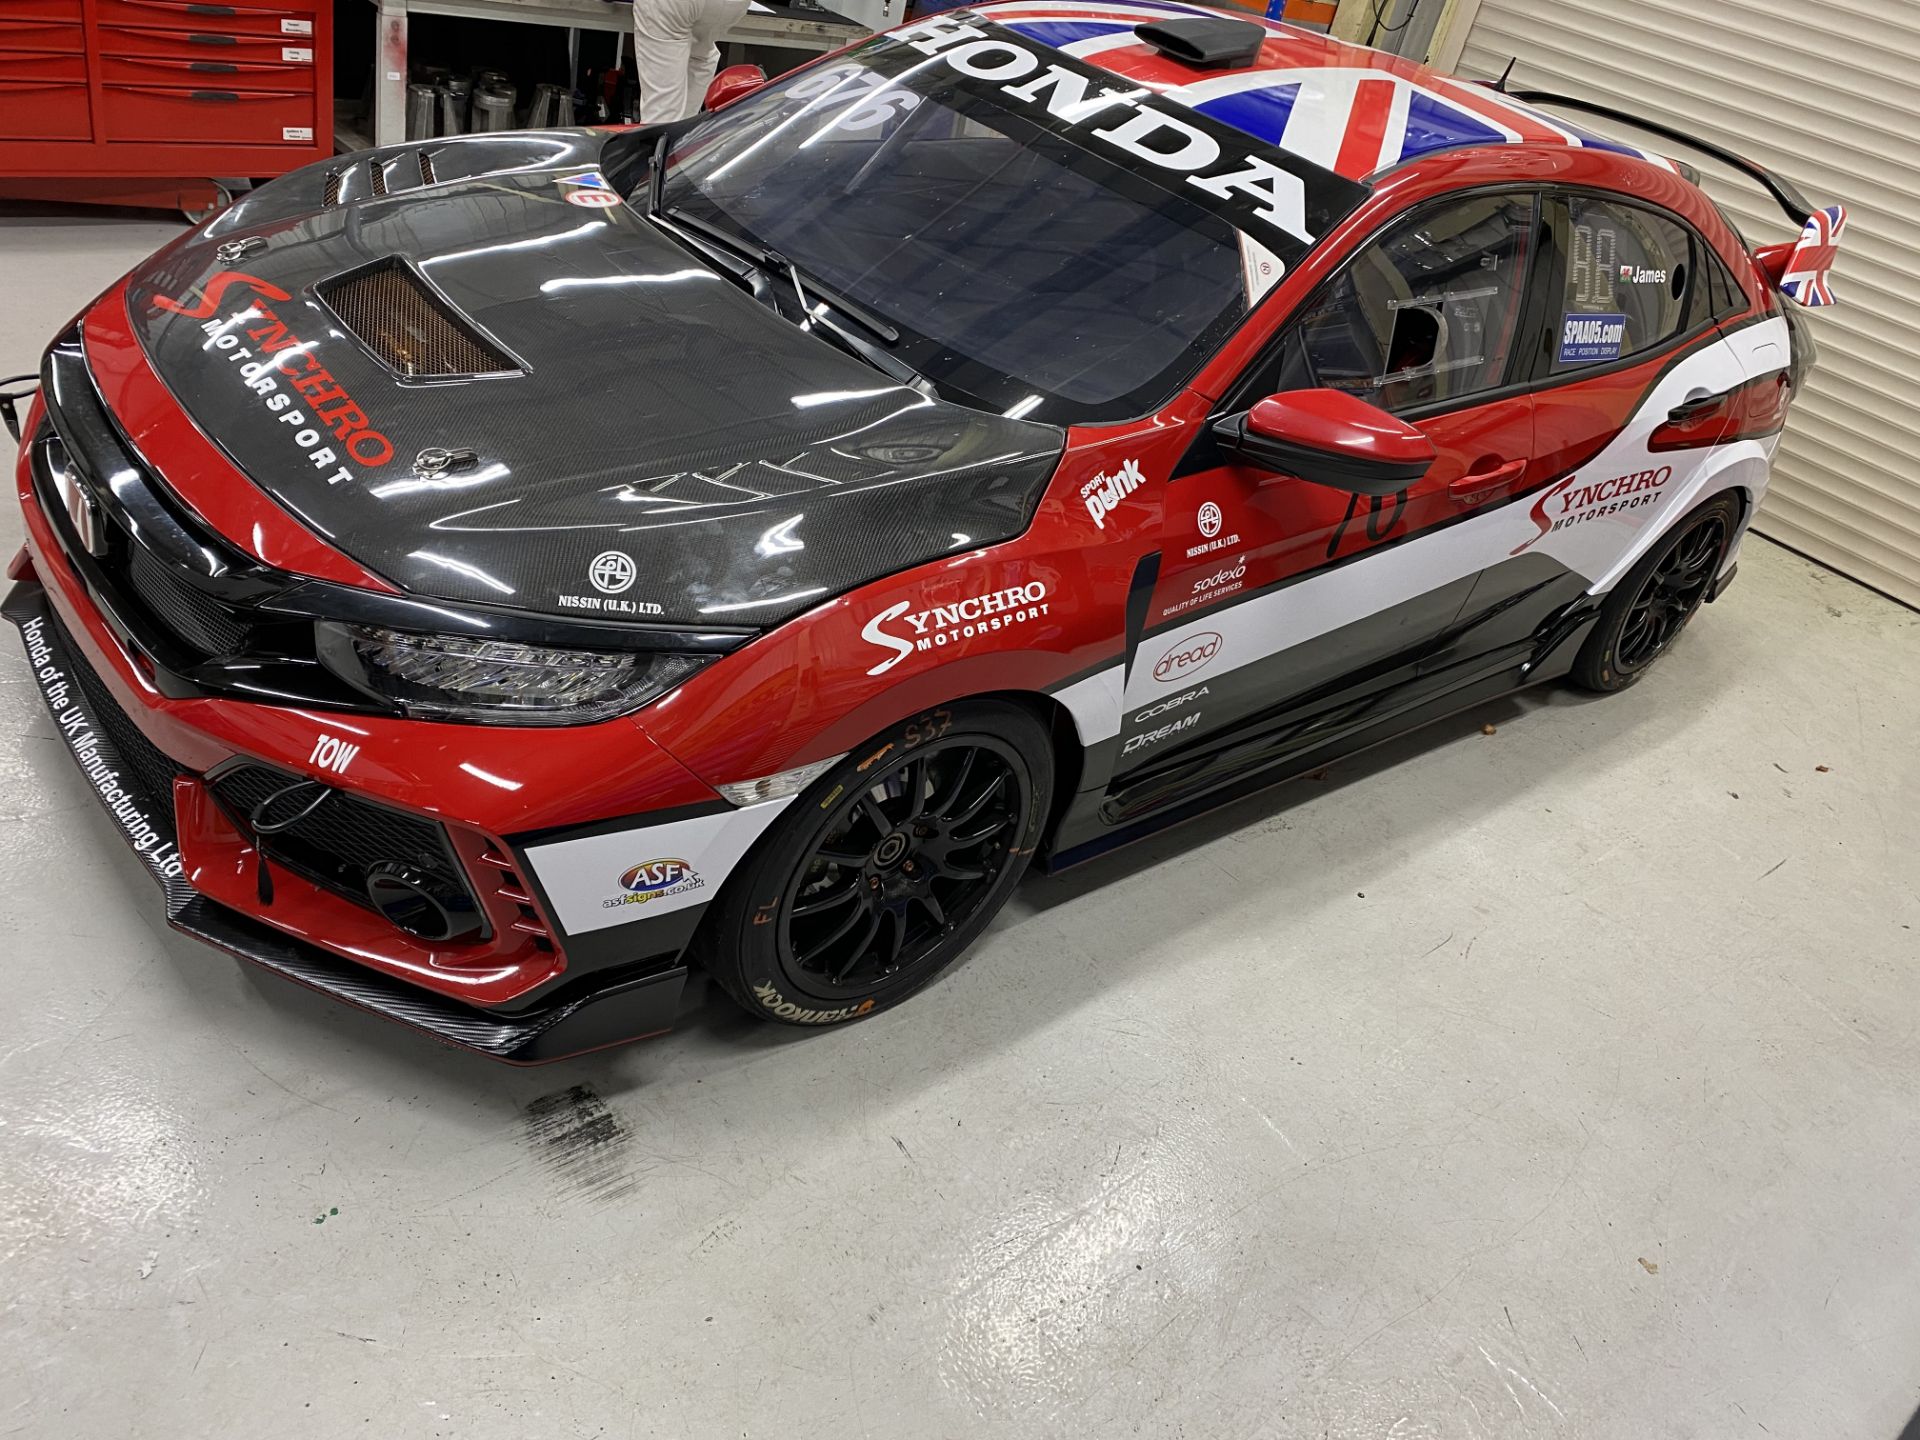 Honda Civic Endurance 20L FK8 type R left hand drive racing car, red and black paint finish, 2018 - Image 3 of 93